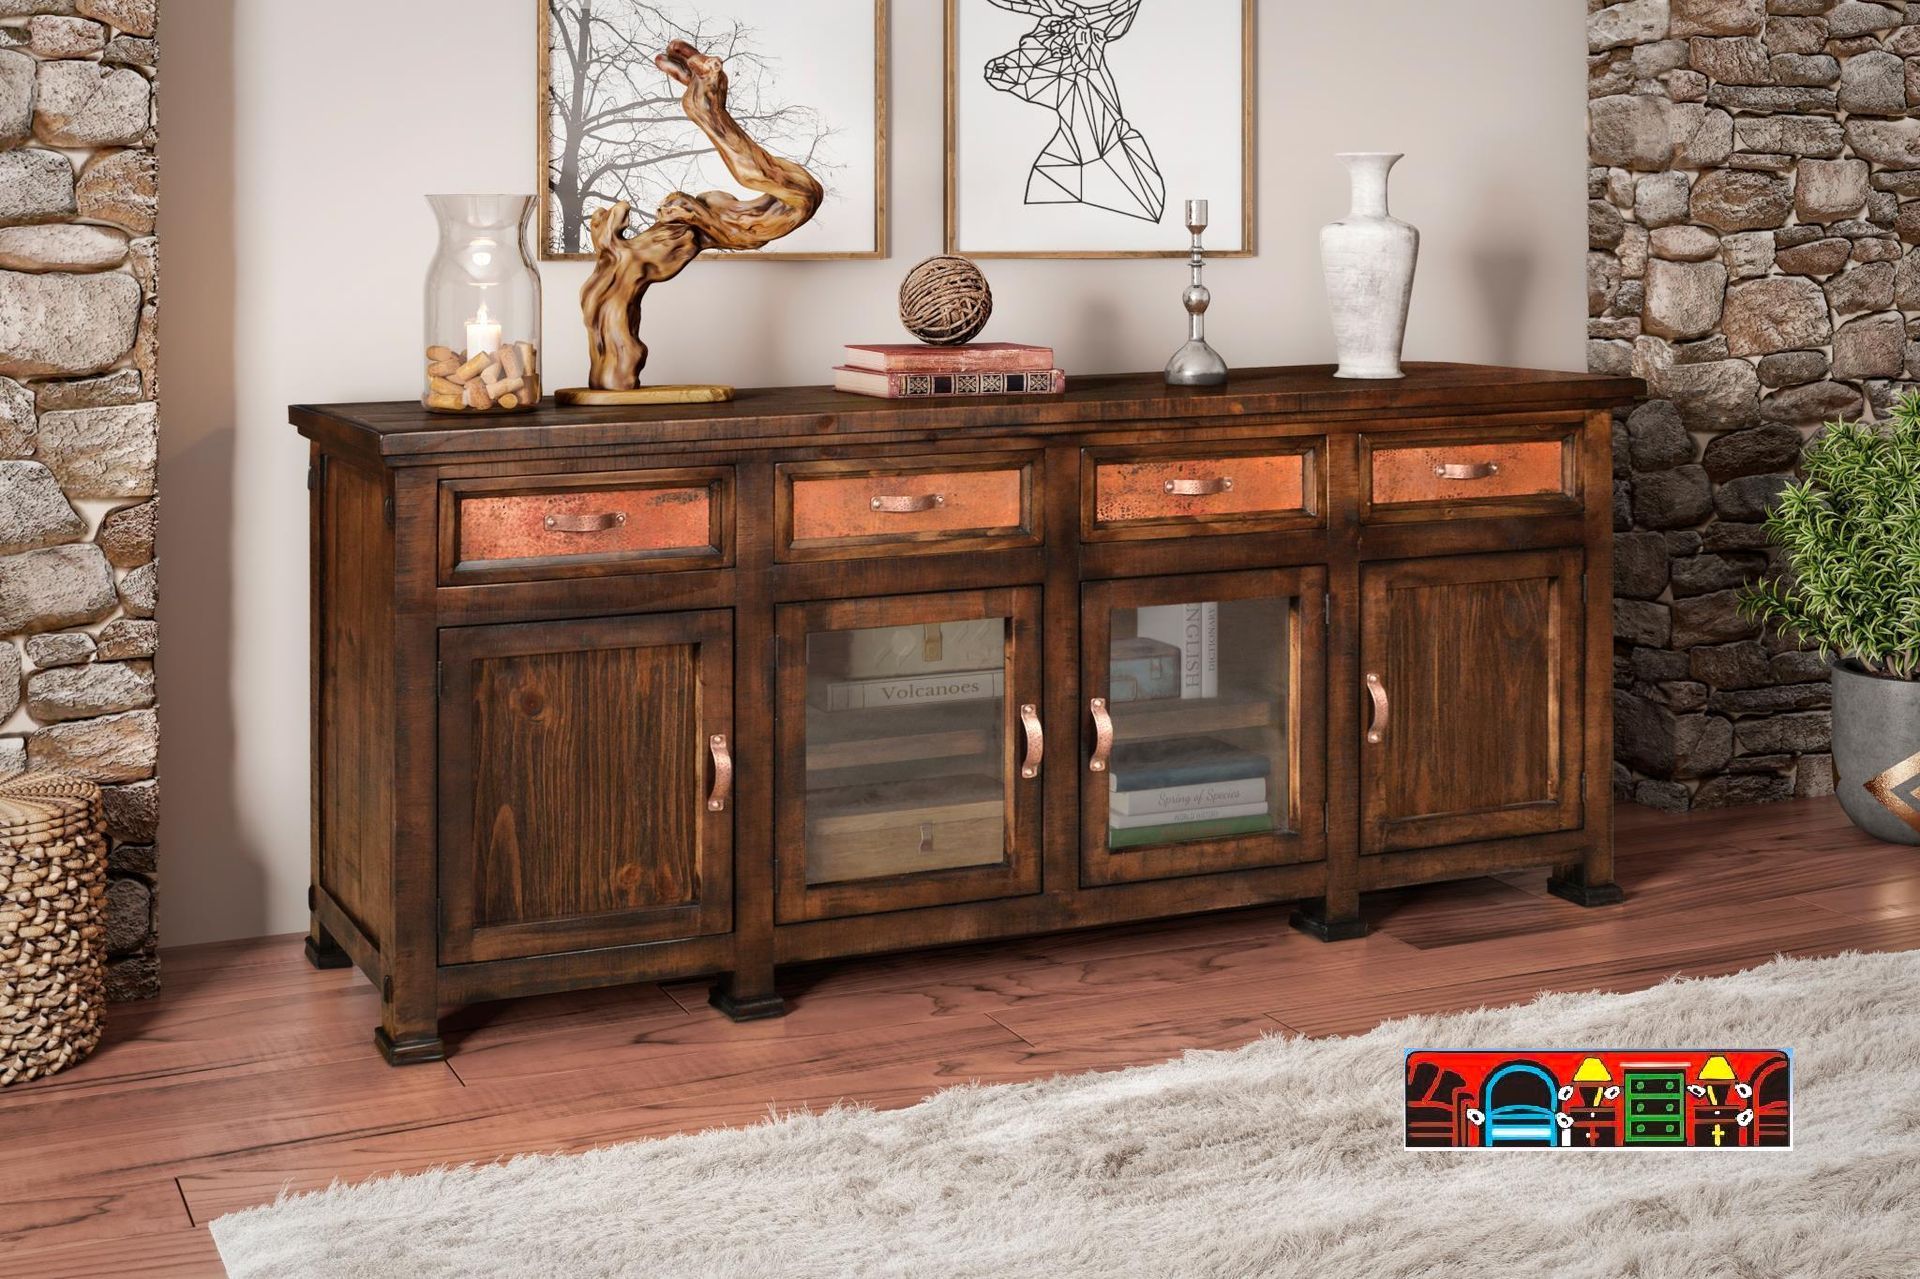 'A spacious, warm-brown entertainment console featuring four copper-front drawers at the top, two glass doors in the center, and two wooden doors on the sides. Each door opens to reveal an interior storage shelf.'